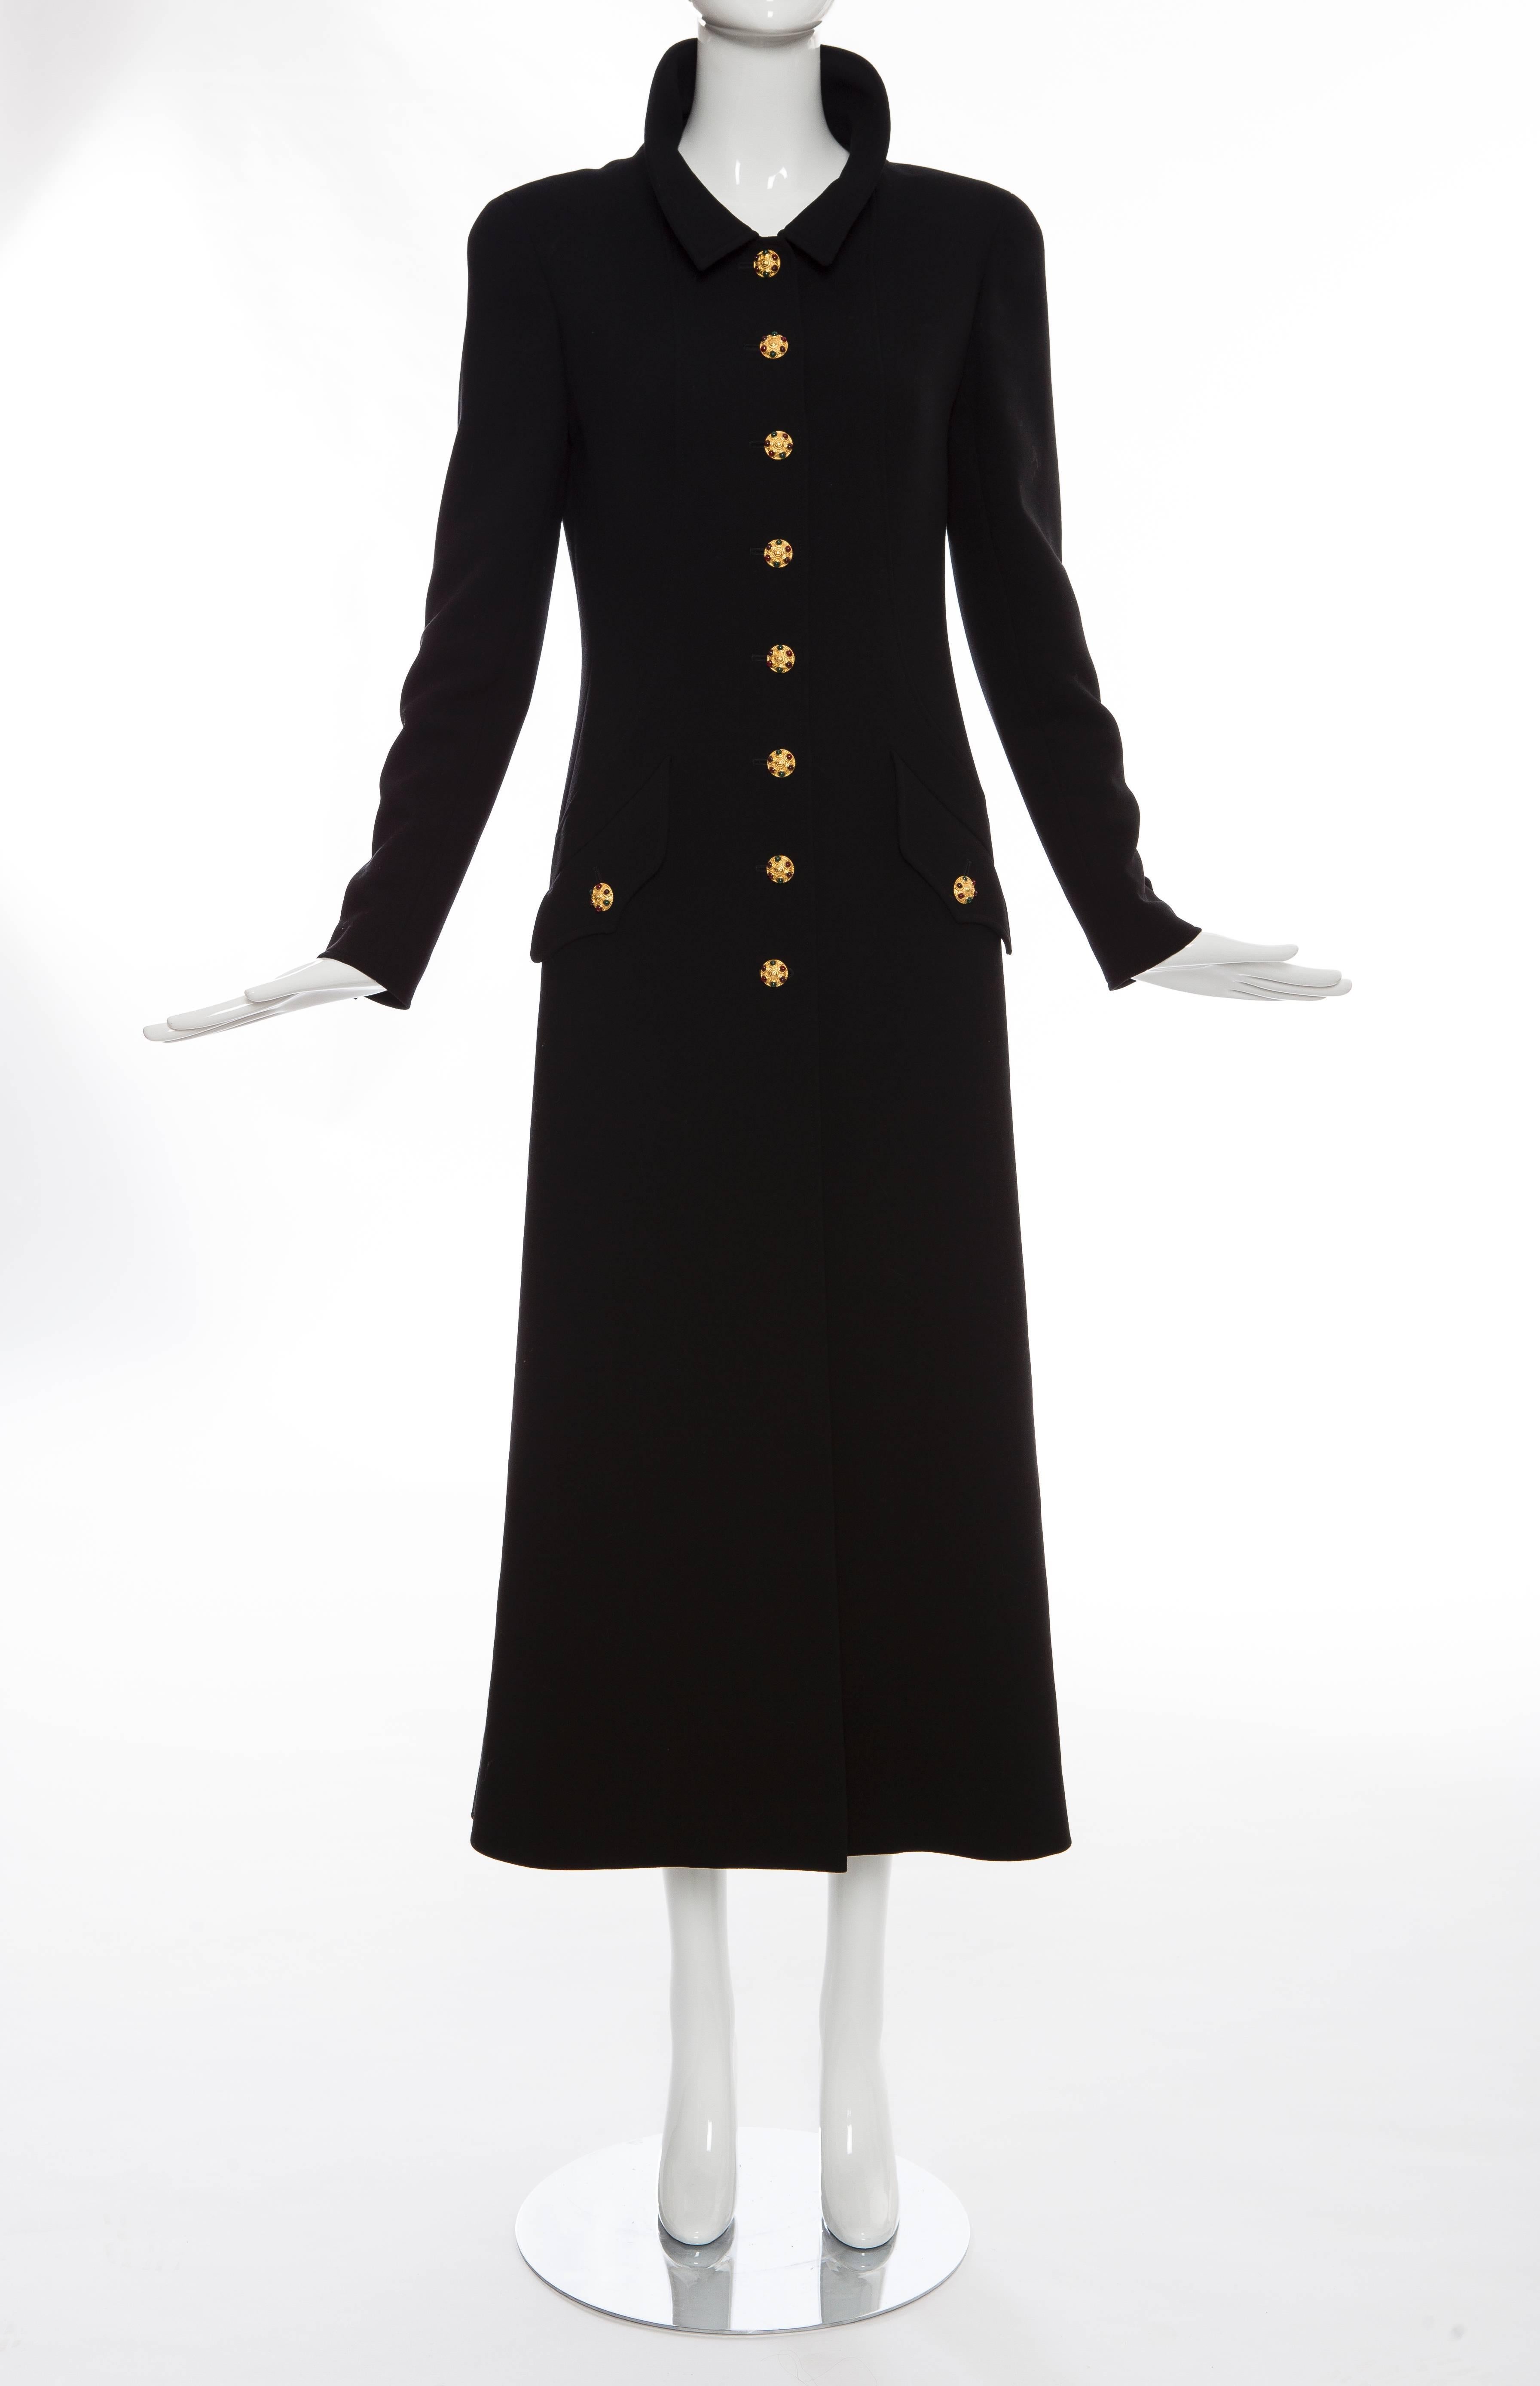 Chanel, Autumn-Winter 1996, black wool long chesterfield coat with eighteen Maison Gripoix buttons, dual flap pockets, back vent and fully lined in silk. 

FR. 40
US. 8

Bust 36”, Waist 32”, Shoulder 14”, Length 52”, Sleeve 32.5”